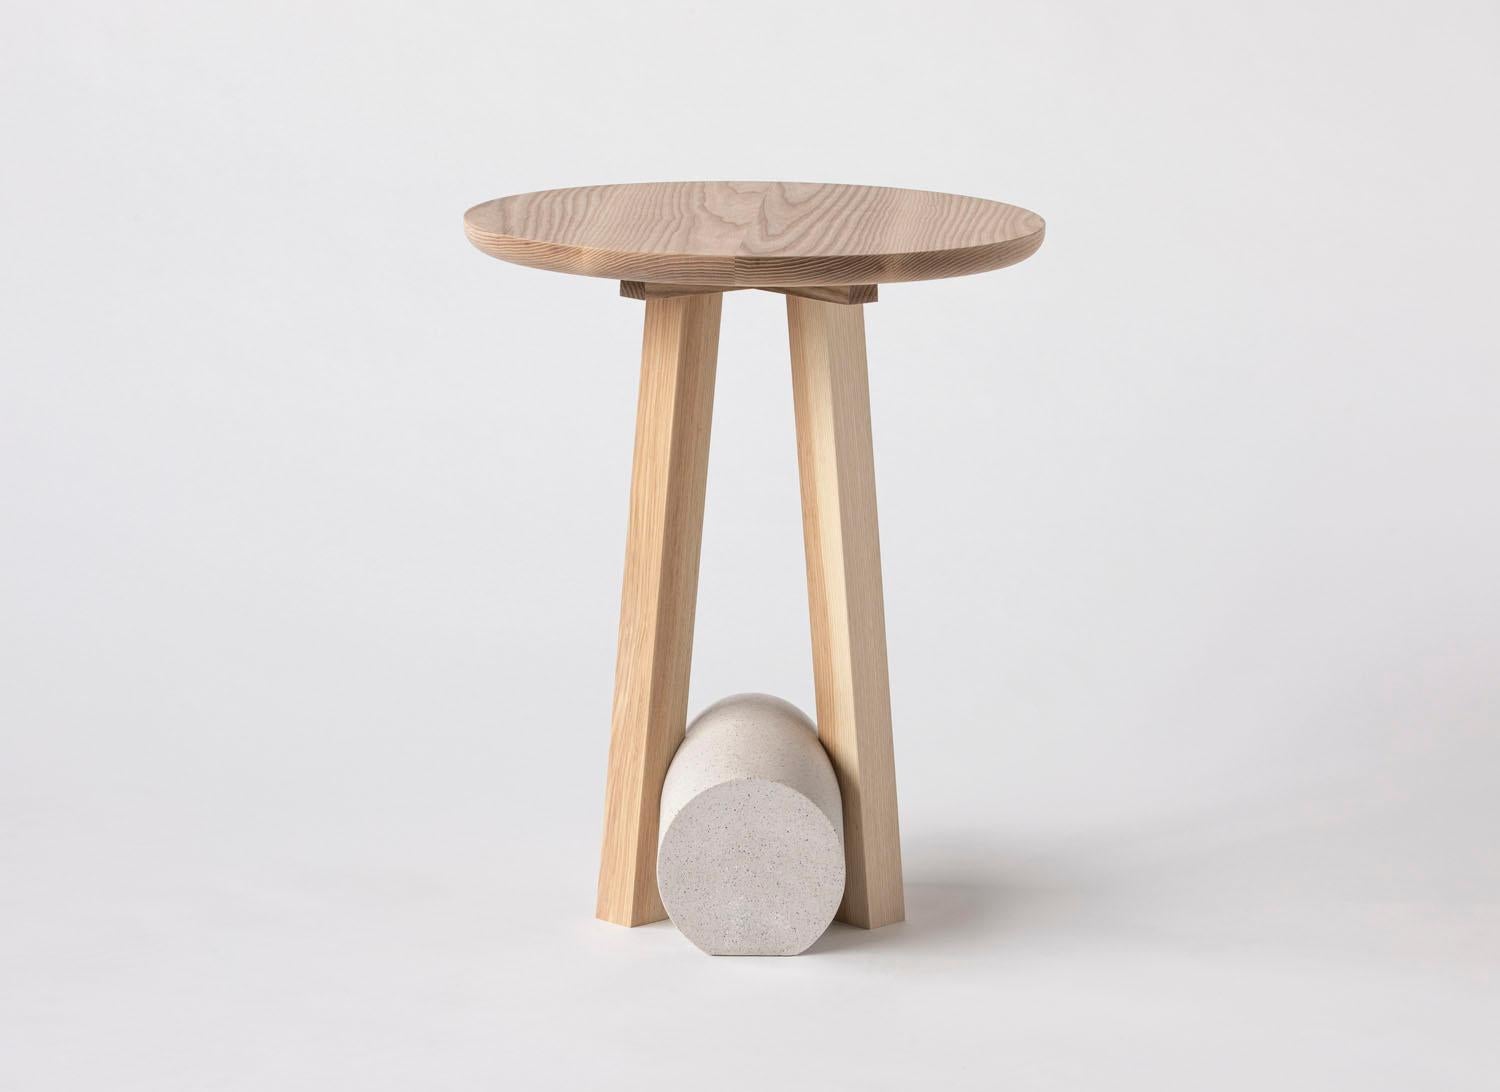 Modern Poise Contemporary Side Table in Solid Ash Hardwood and Concrete